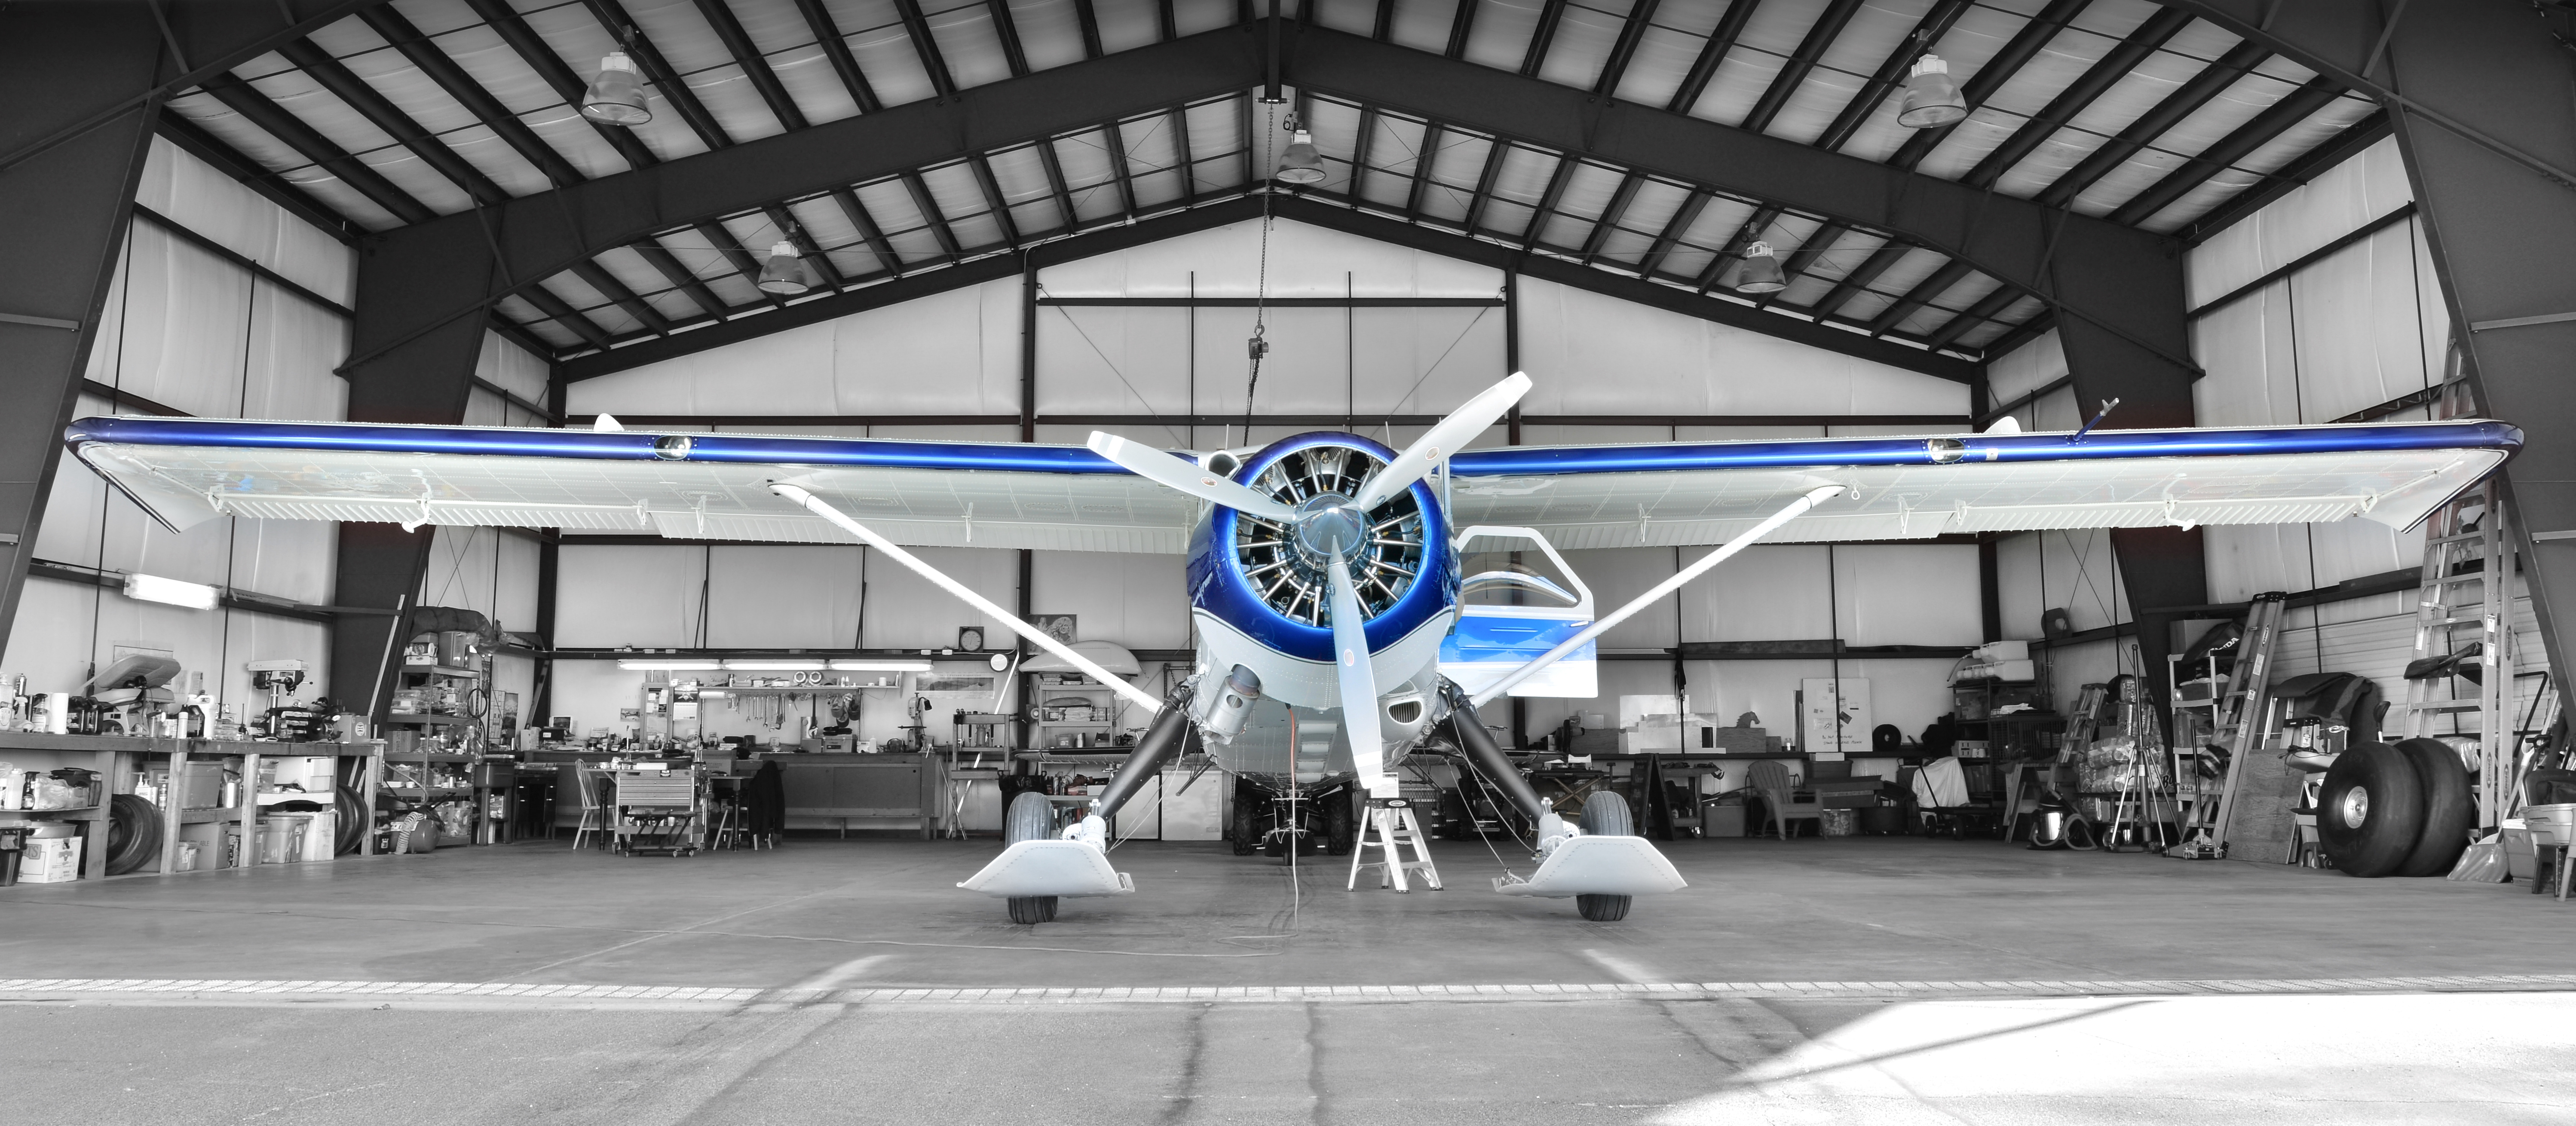 Background image displaying a plane in a hangar.